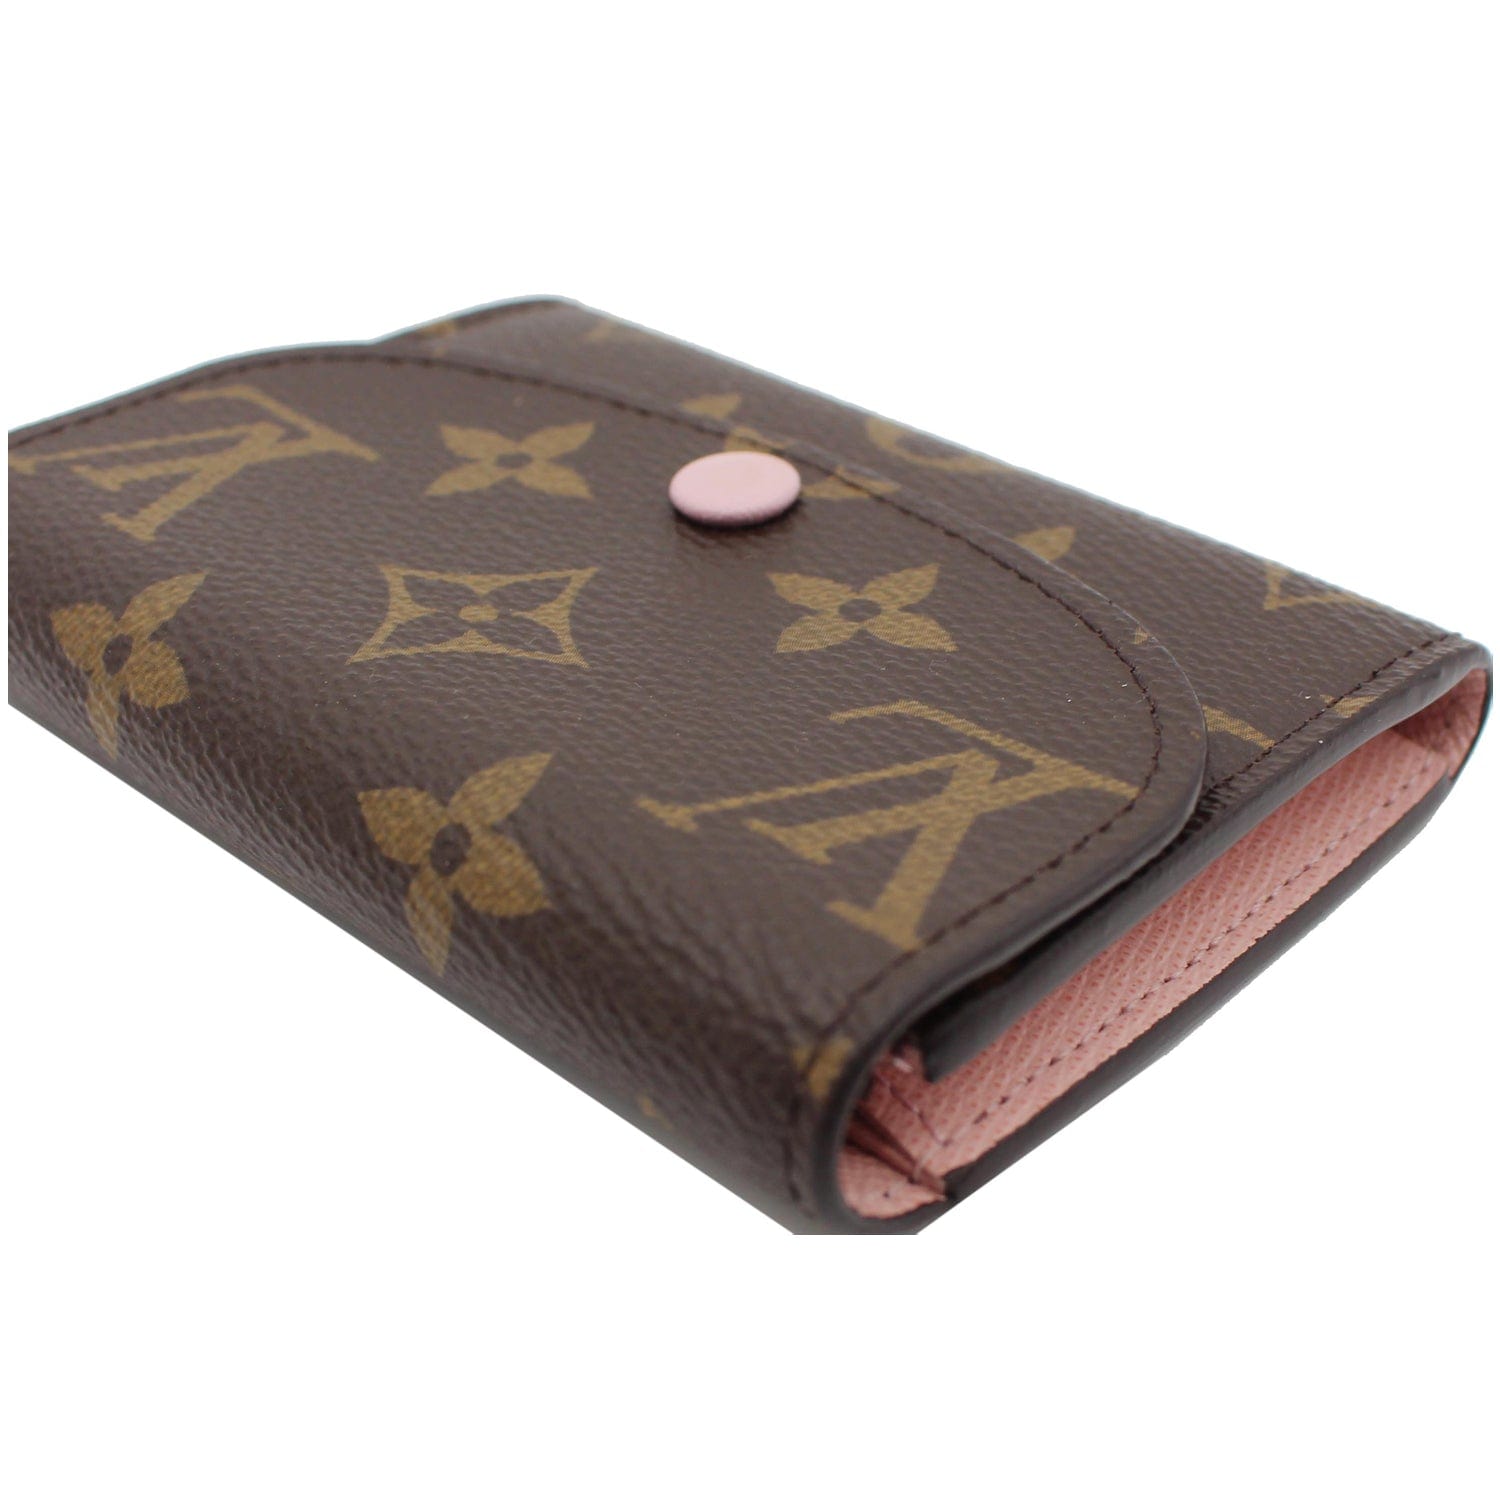 Rosalie Coin Purse Monogram Canvas - Wallets and Small Leather Goods M62361